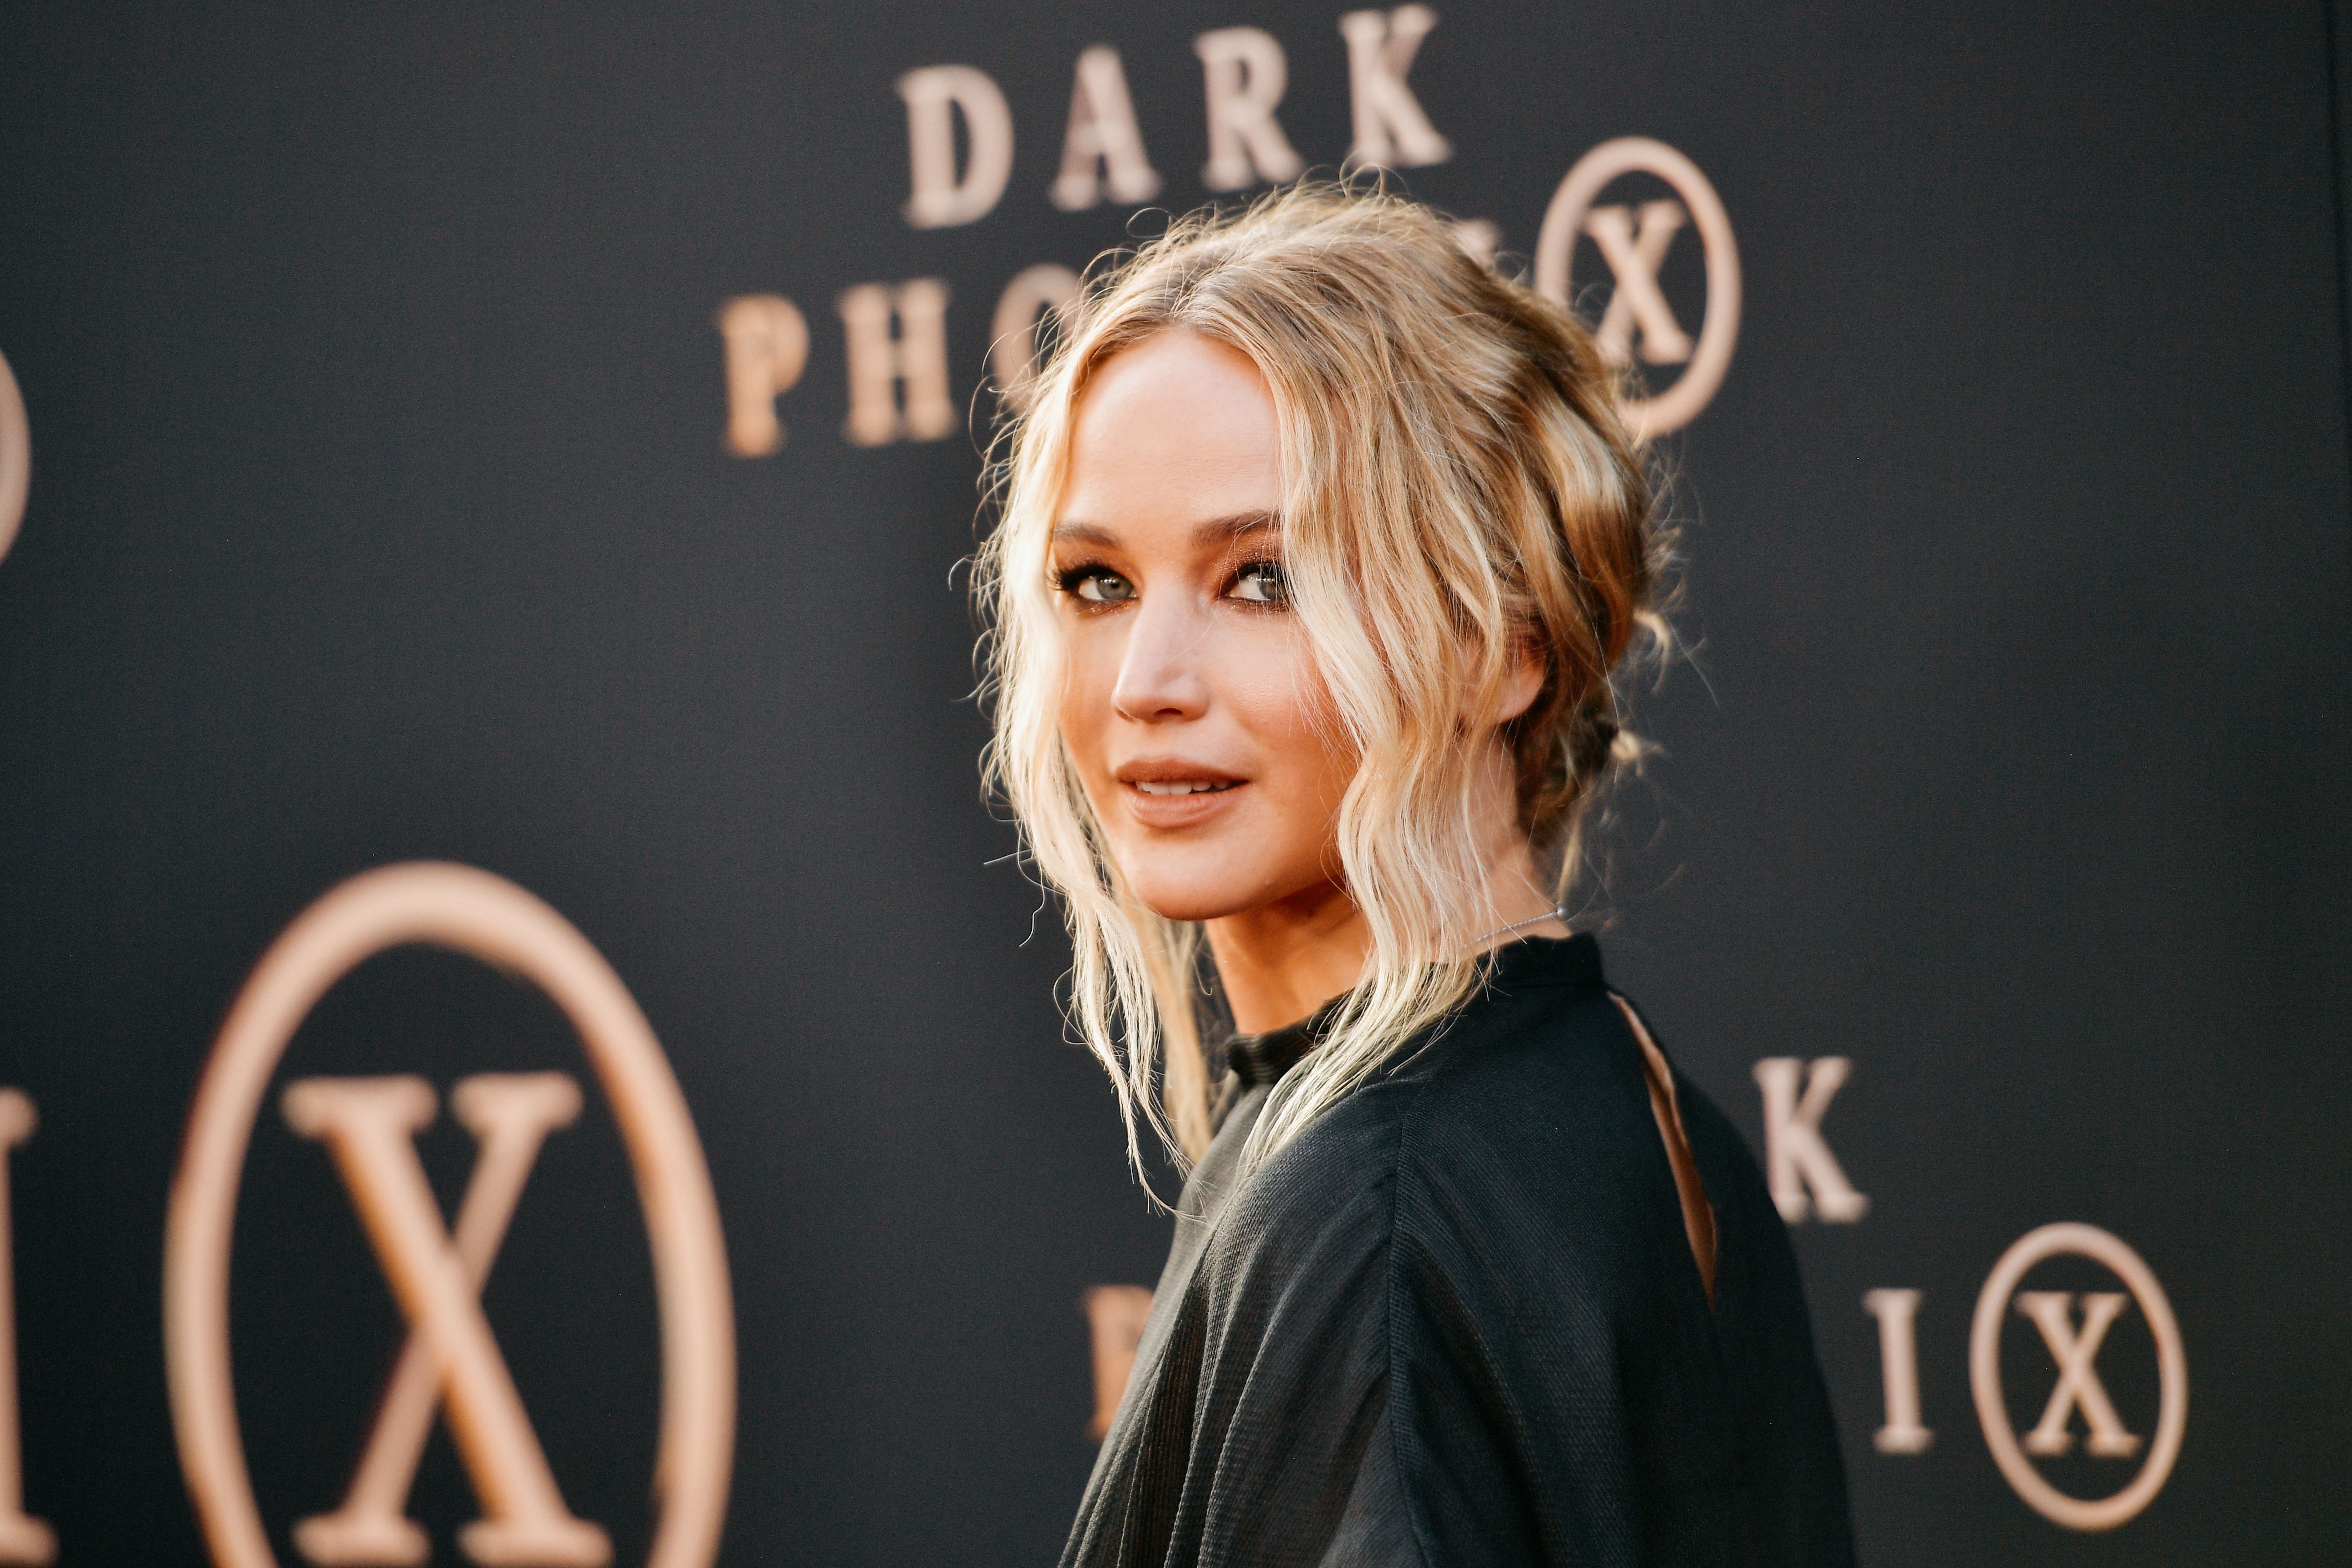 Jennifer Lawrence at the premiere of 20th Century Fox's "Dark Phoenix" at TCL Chinese Theatre on June 04, 2019 | Photo: Getty Images